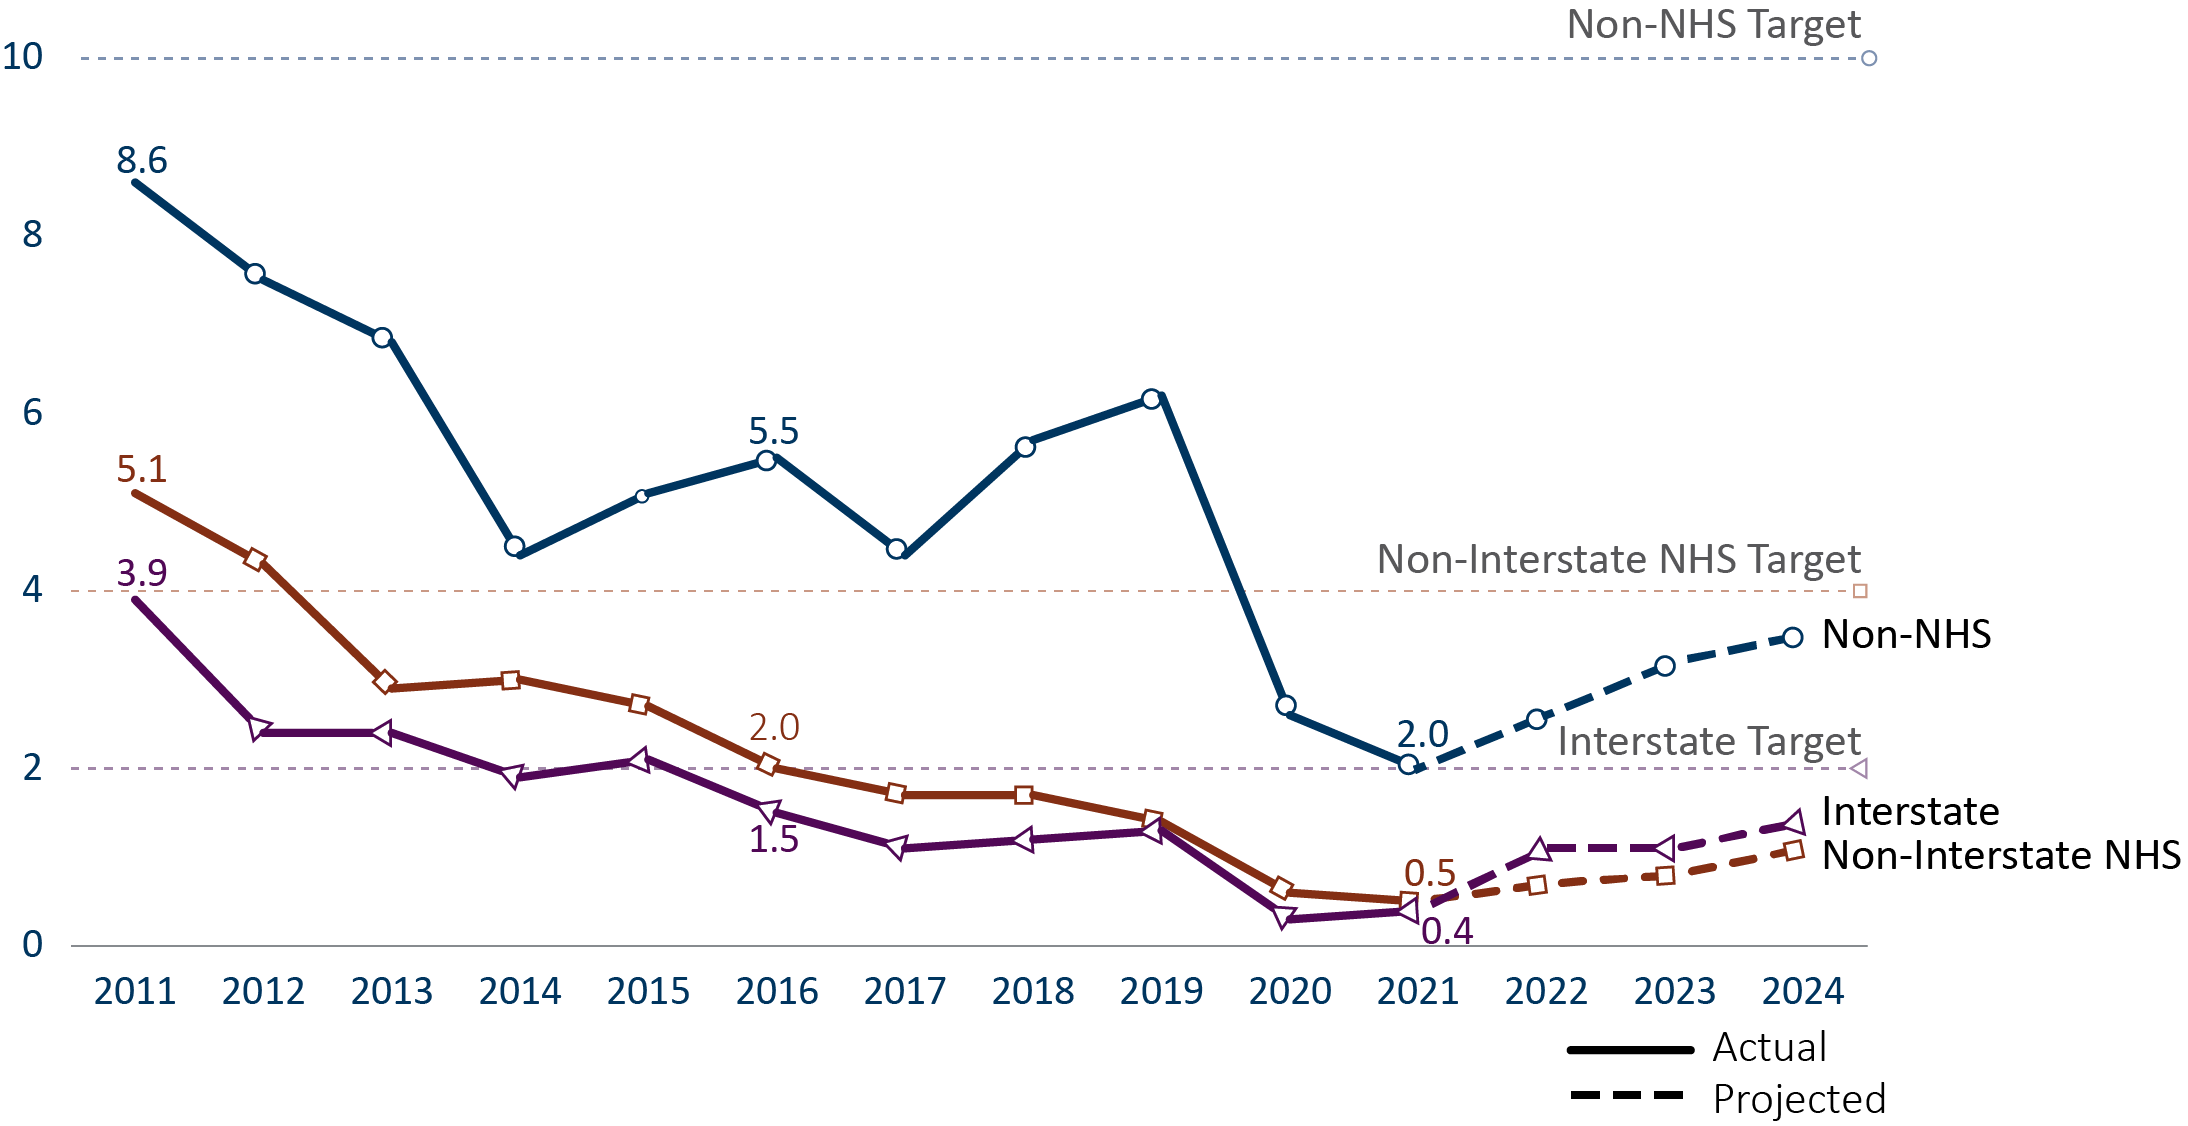 Chart shows percent of Minnesota State Highway pavement in poor condition for the Interstate system, Non-Interstate NHS system and Non-NHS system. There was 3.9% of the Interstate system in poor condition in 2011, 1.5% of the Interstate system in poor condition in 2016 and a projected 0.5% in 2021. There was 5.1% of the Non-Interstate NHS system in poor condition in 2011, 2.0% of the Non-Interstate NHS system in poor condition in 2016 and a projected 0.6% in 2021. There was 8.6% of the Non-NHS system in poor condition in 2011, 5.5% of the Non-NHS system in poor condition in 2016 and a projected 2.4% in 2021.